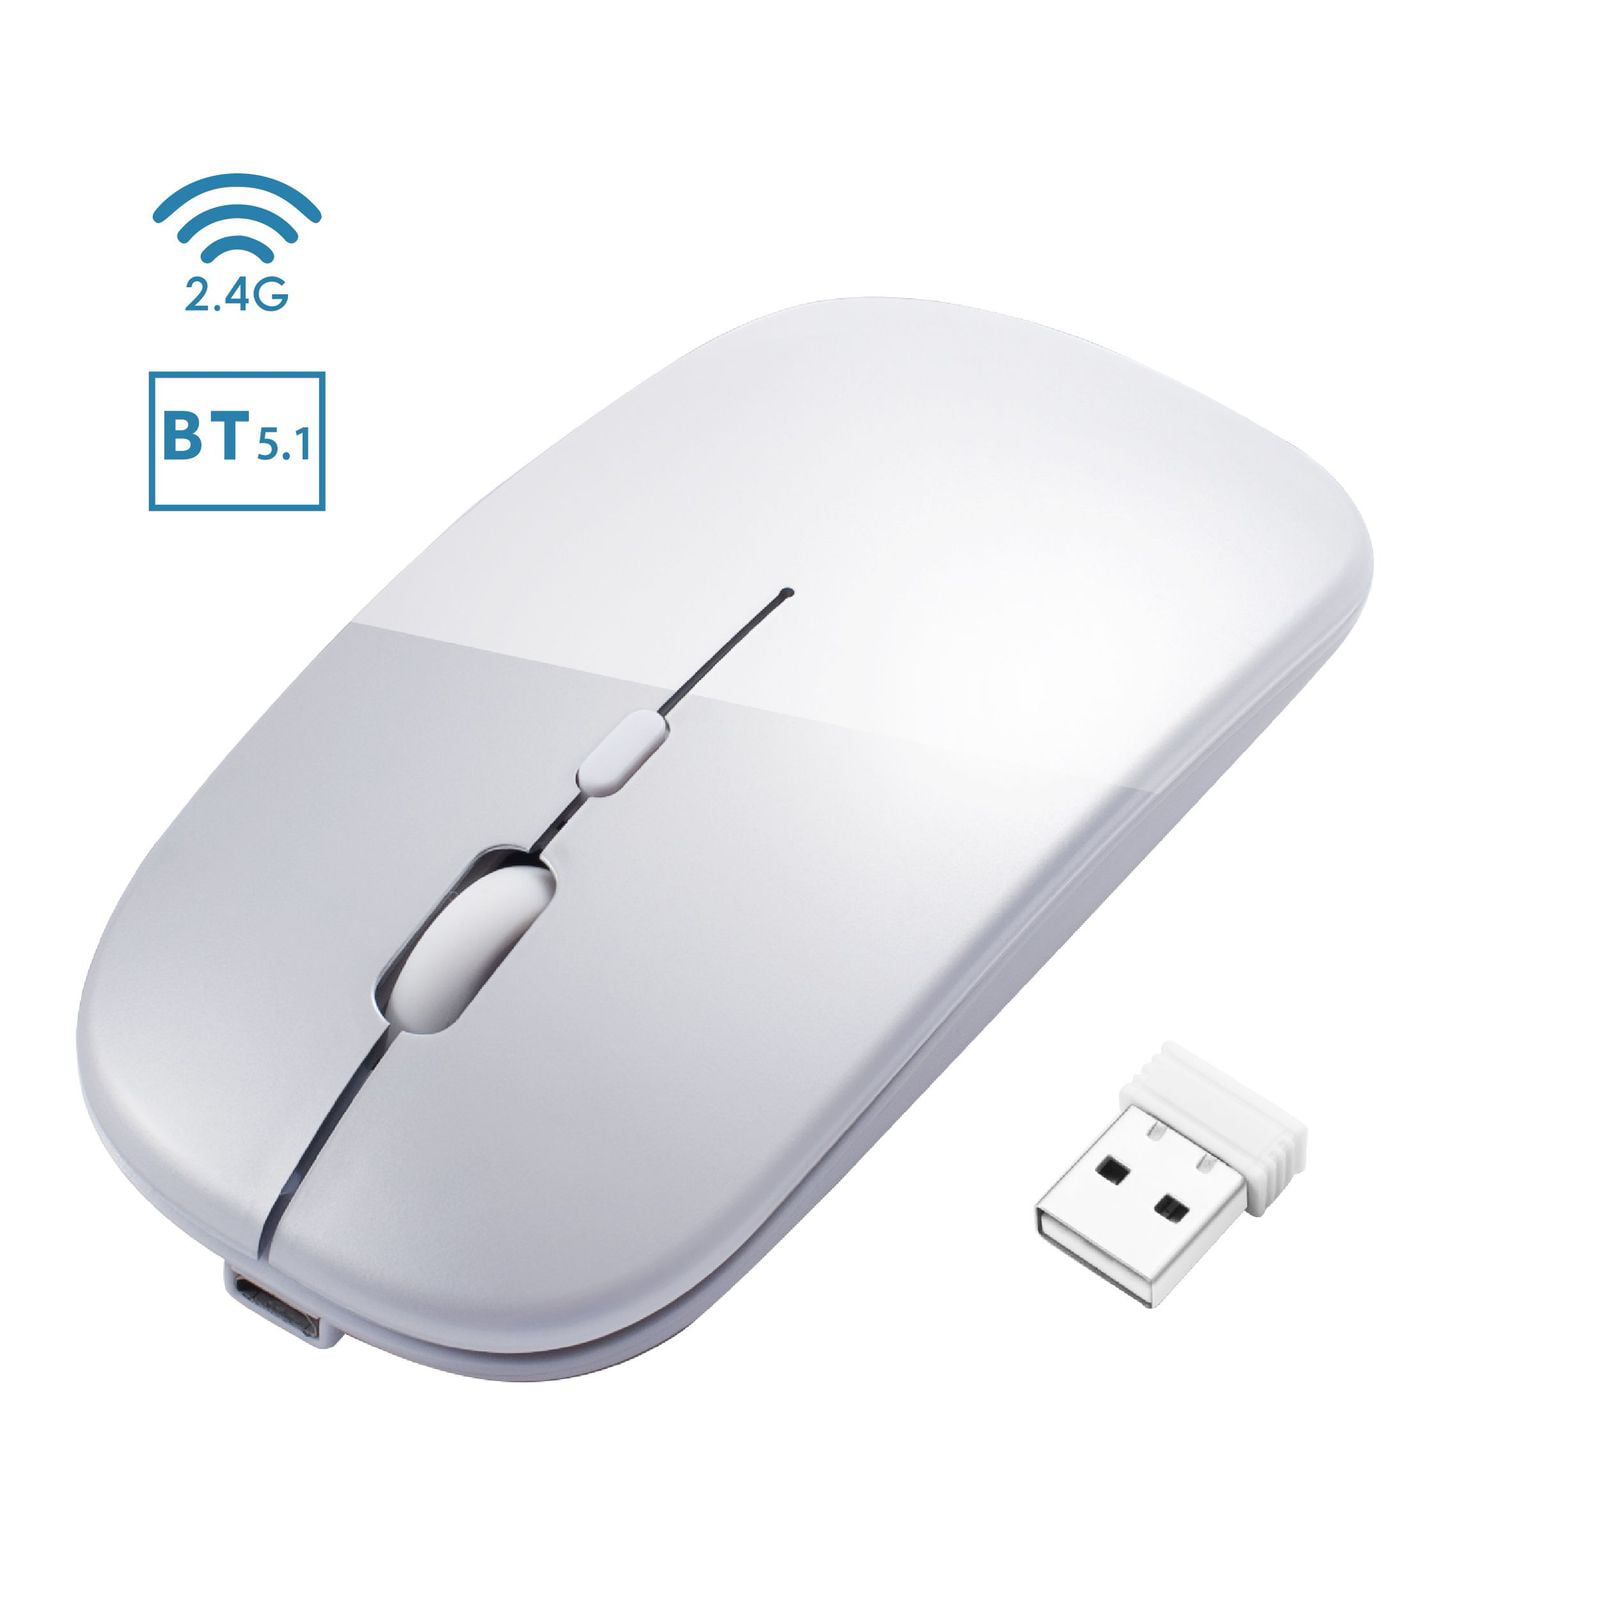 USB Wireless Mouse 2.4G+Bluetooth 5.0 Receiver Latest Super Slim Mouse Gaming for Notebook Laptop for Game